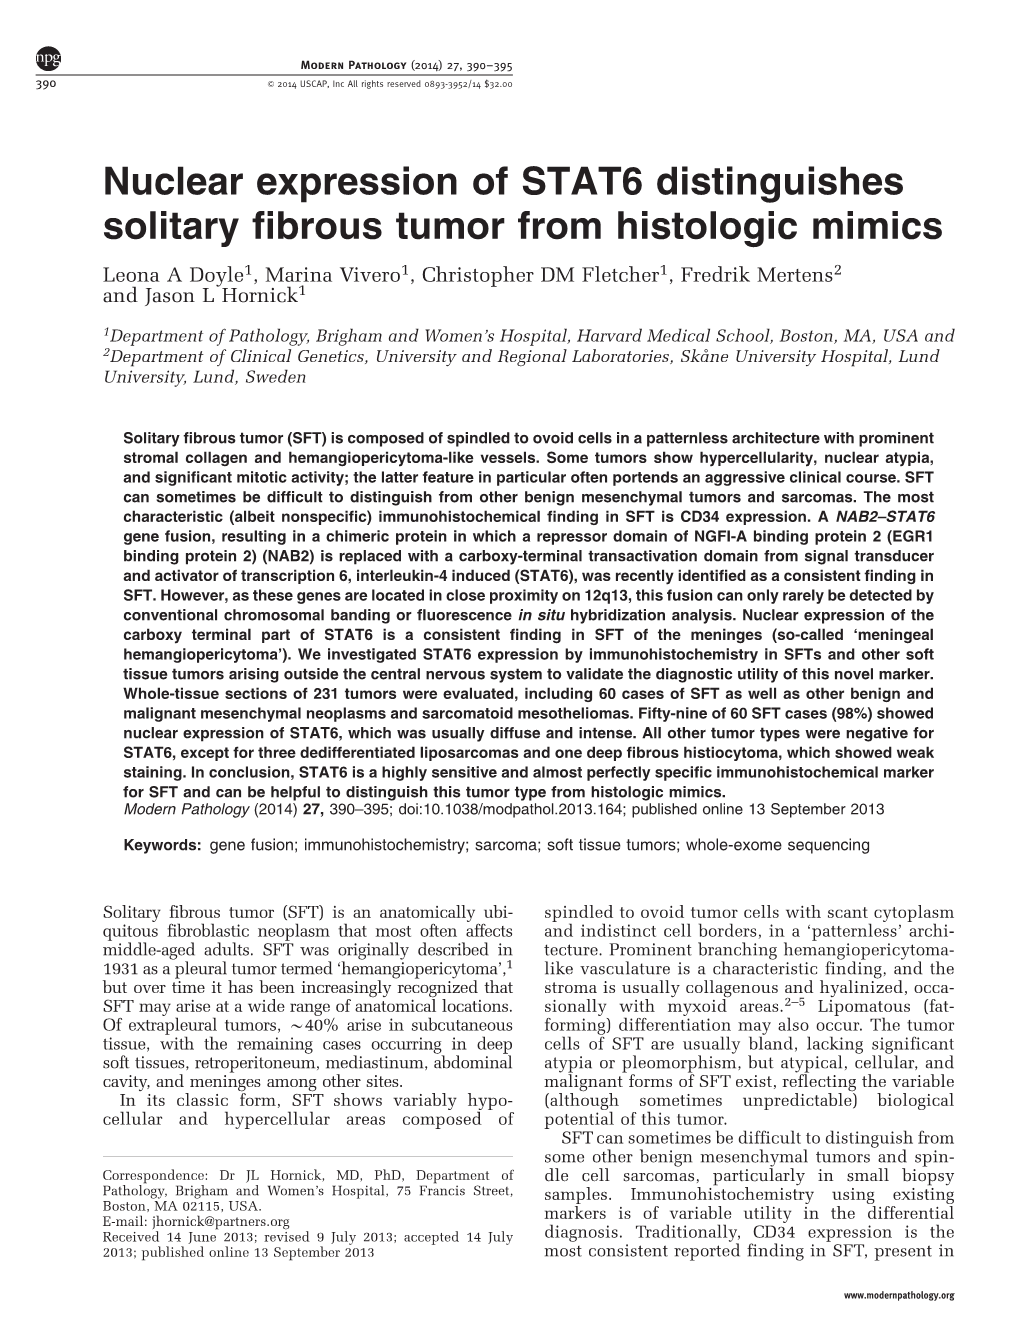 Nuclear Expression of STAT6 Distinguishes Solitary Fibrous Tumor